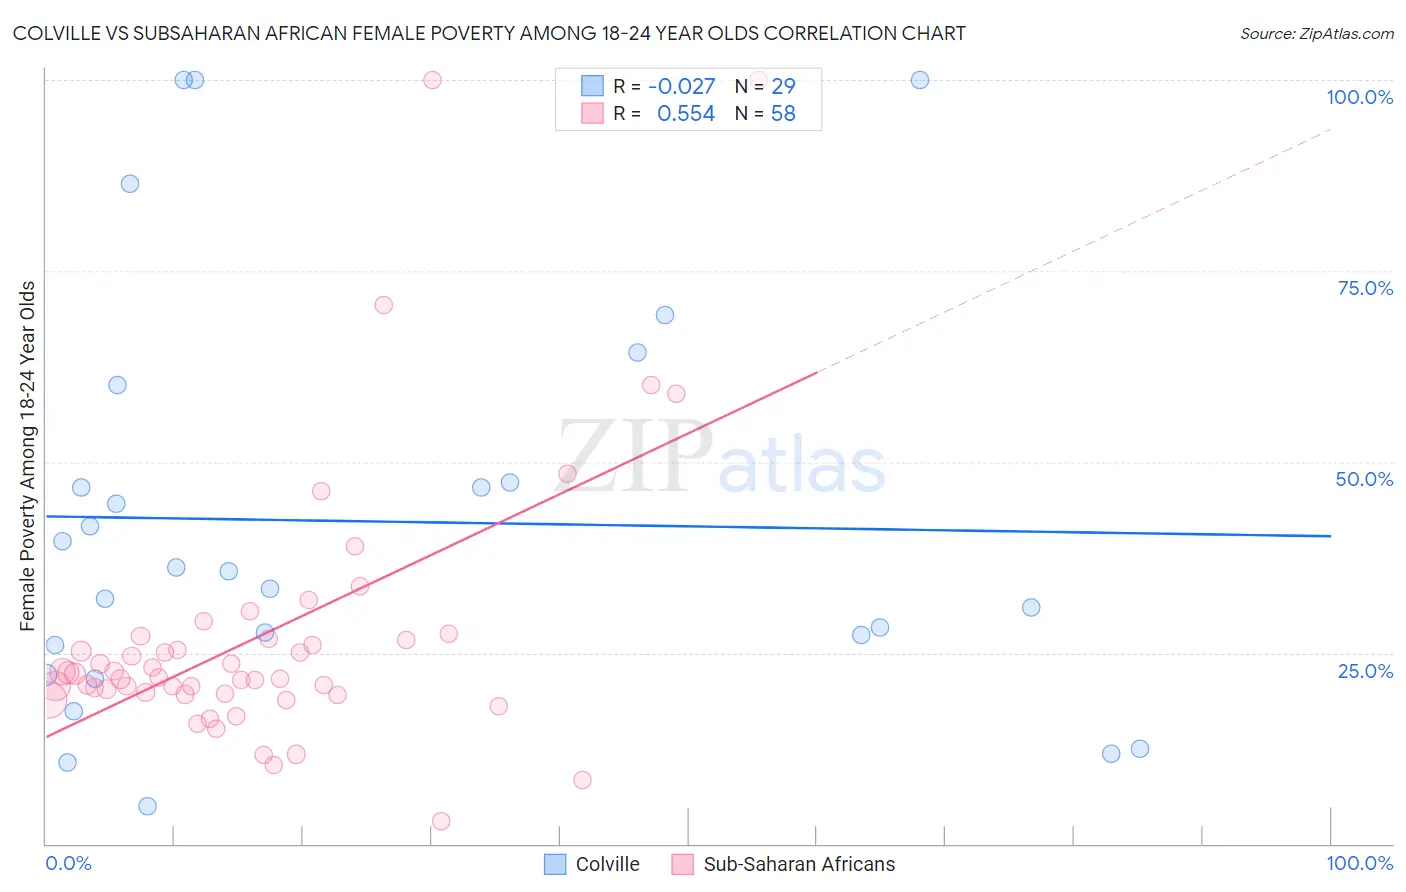 Colville vs Subsaharan African Female Poverty Among 18-24 Year Olds